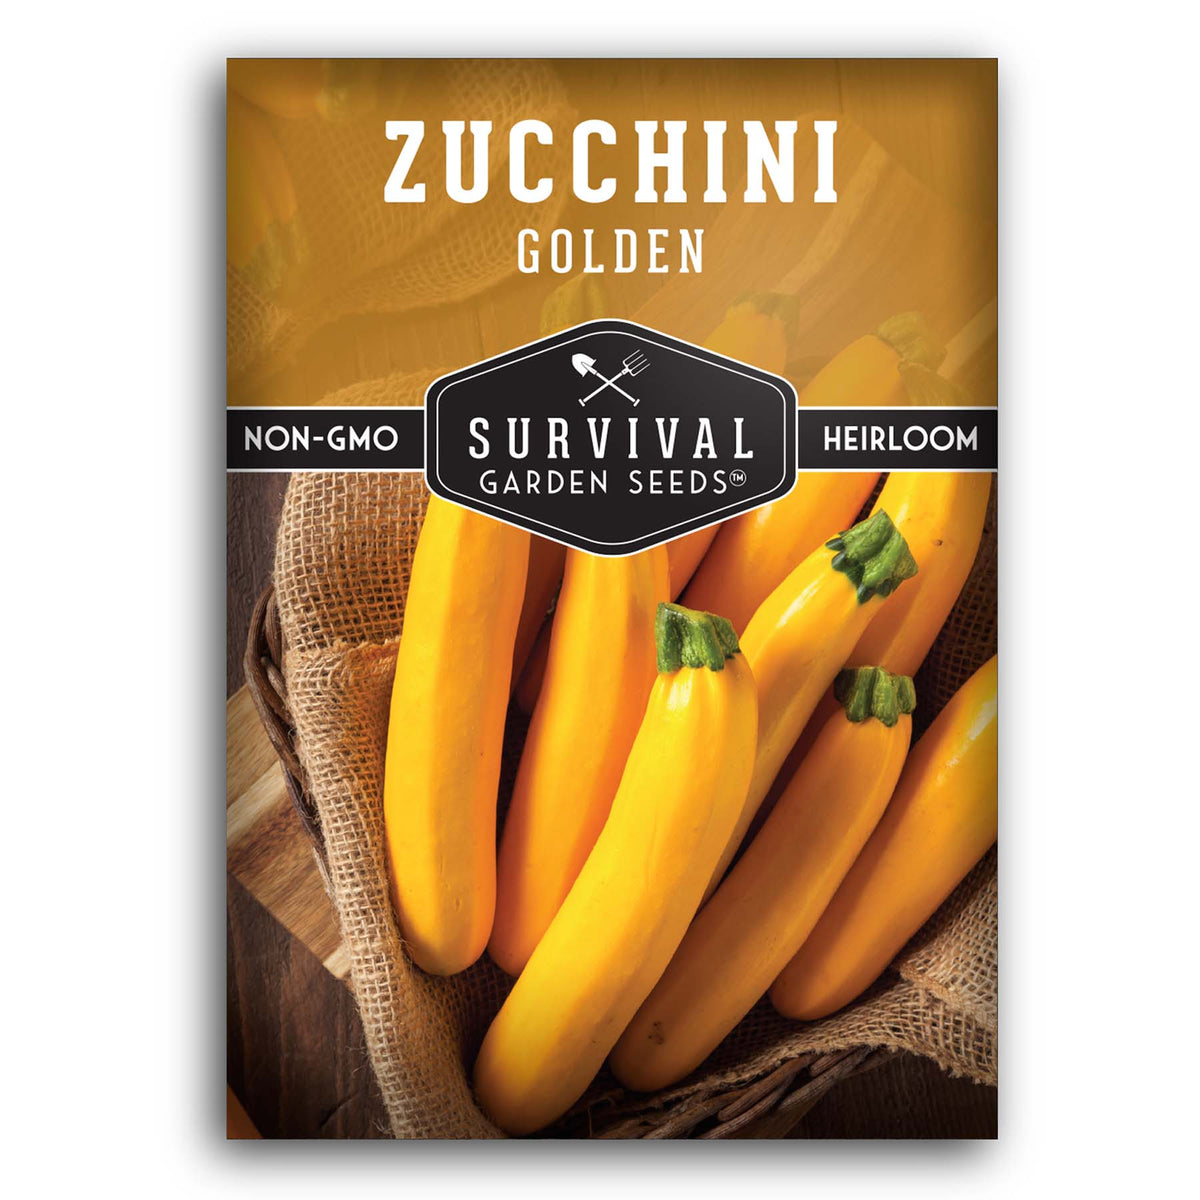 Golden Zucchini Seeds for planting